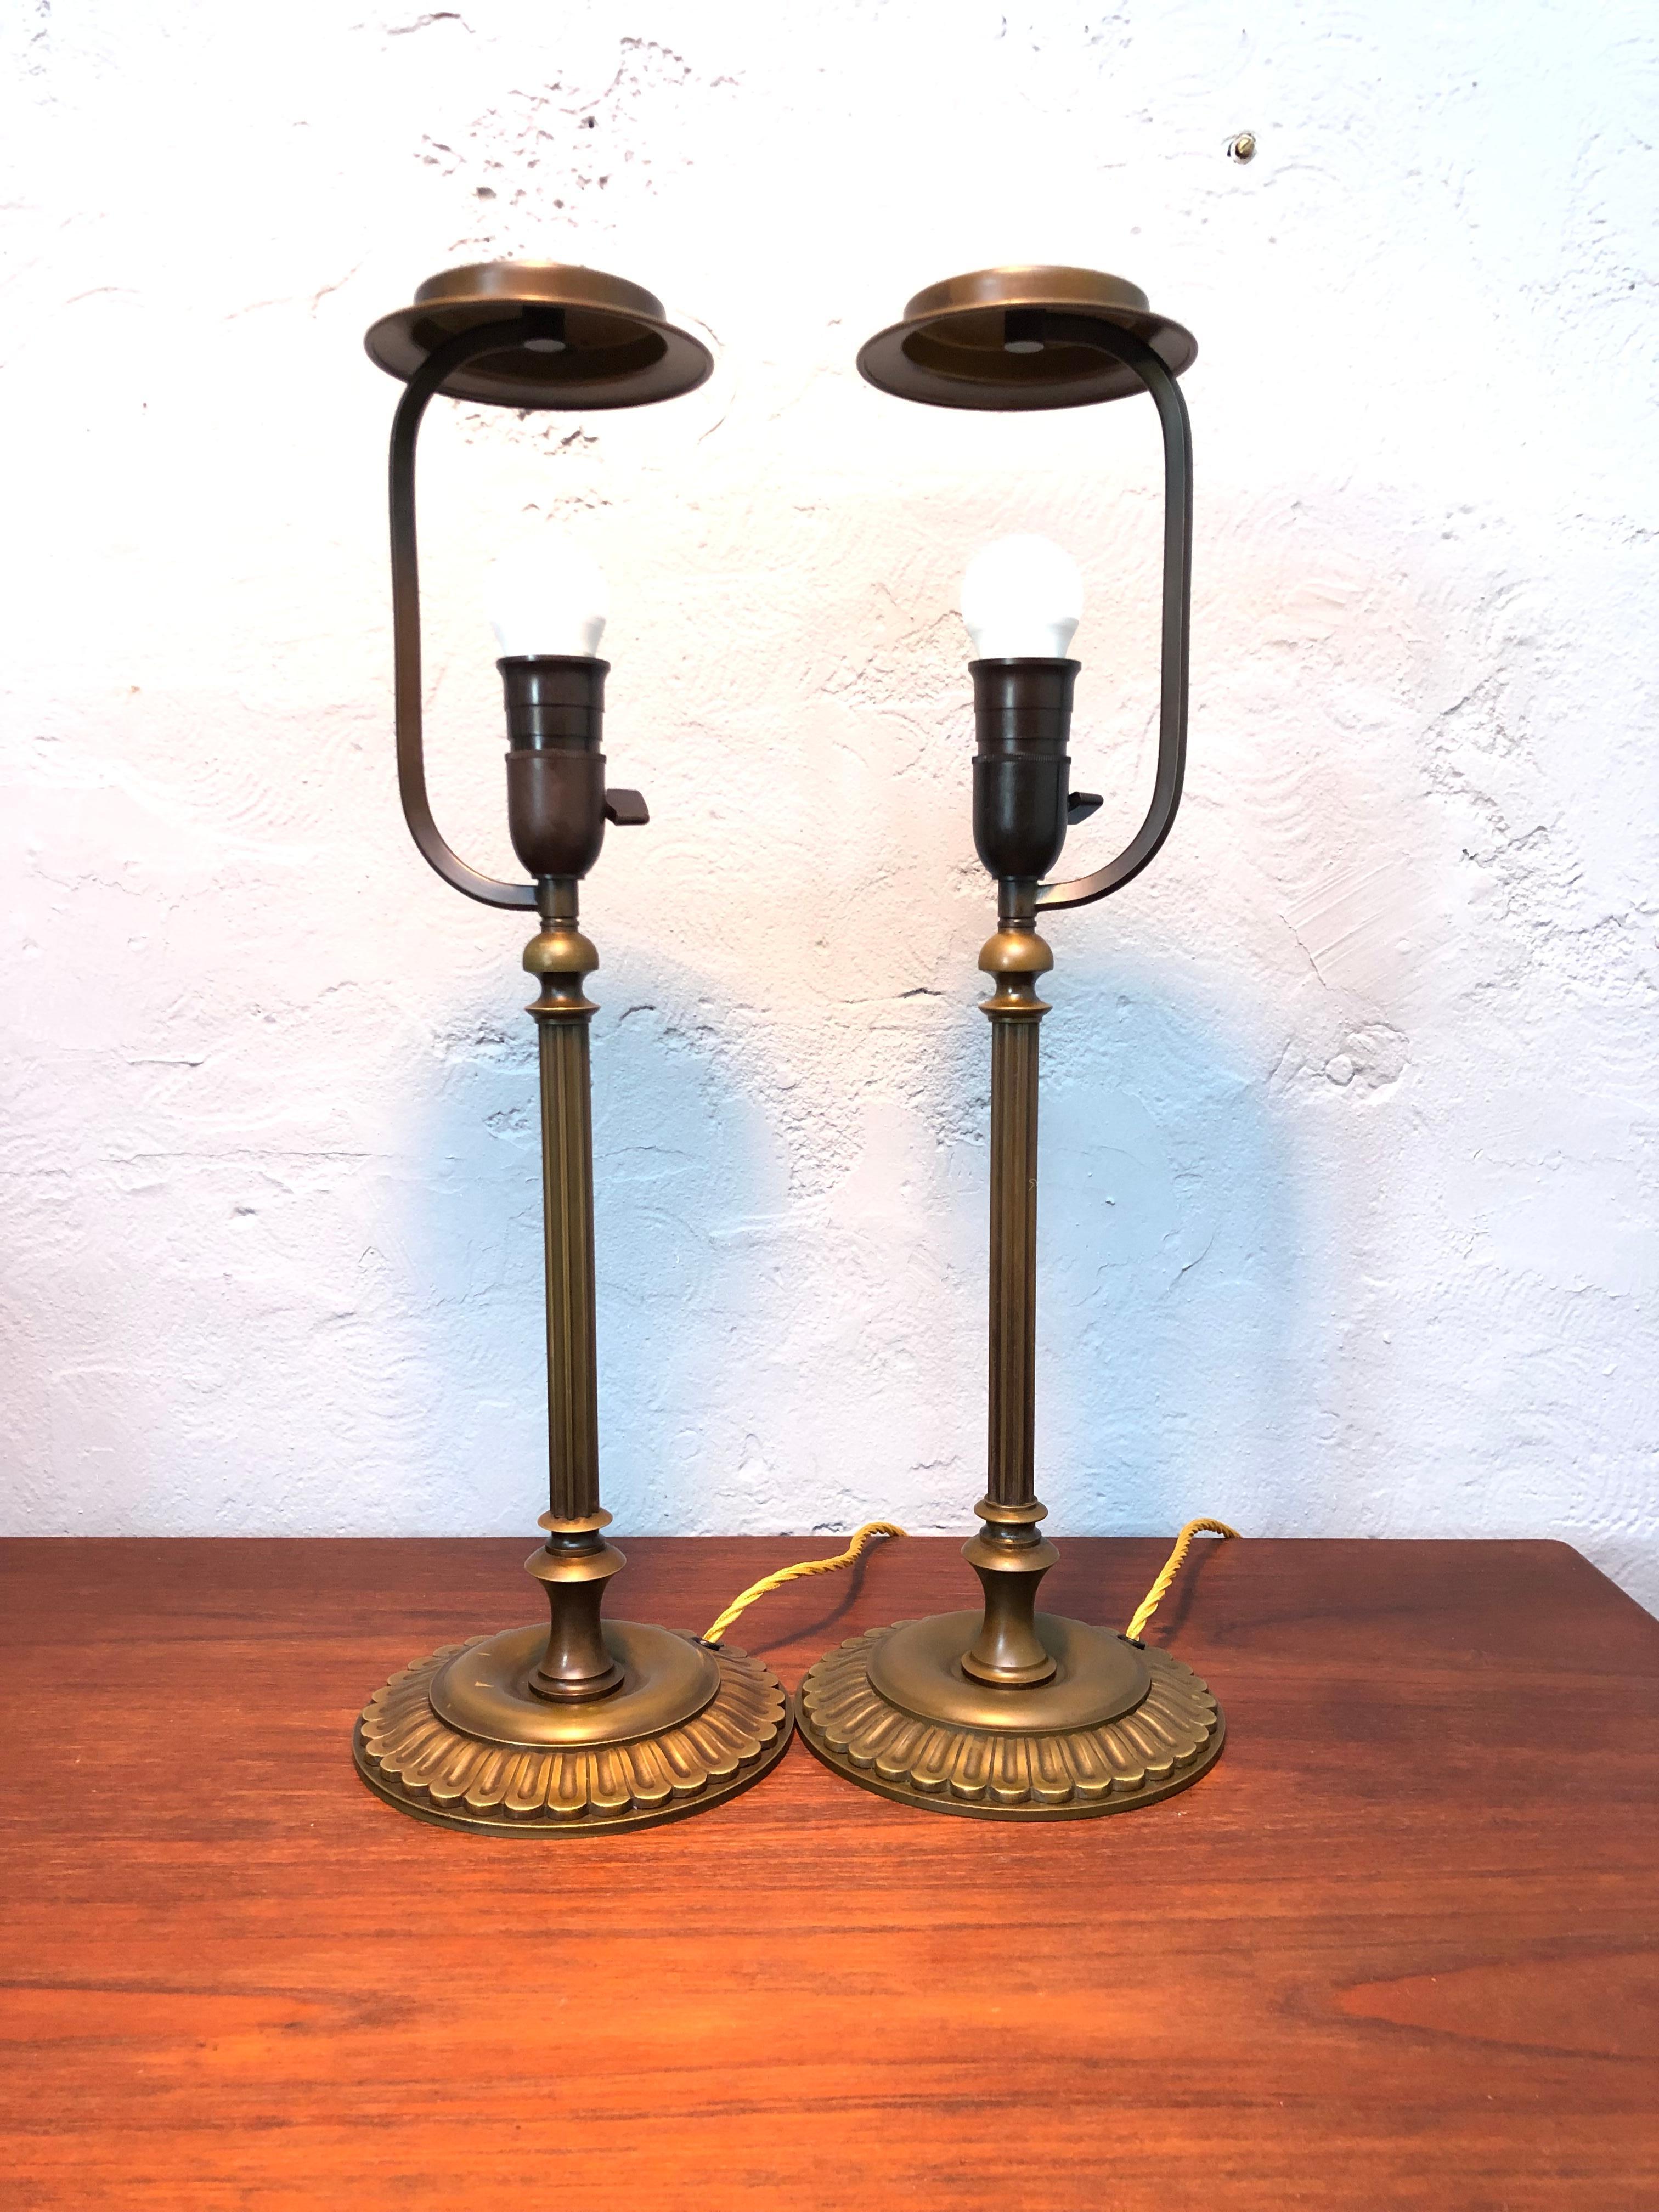 An antique matching pair of Danish brass table lamps from the 1920s.
In original condition with lovely patina and color to the brass. 
Still maintaining their original brass shade holders. 
Great quality and craftsmanship.
The lamps have been